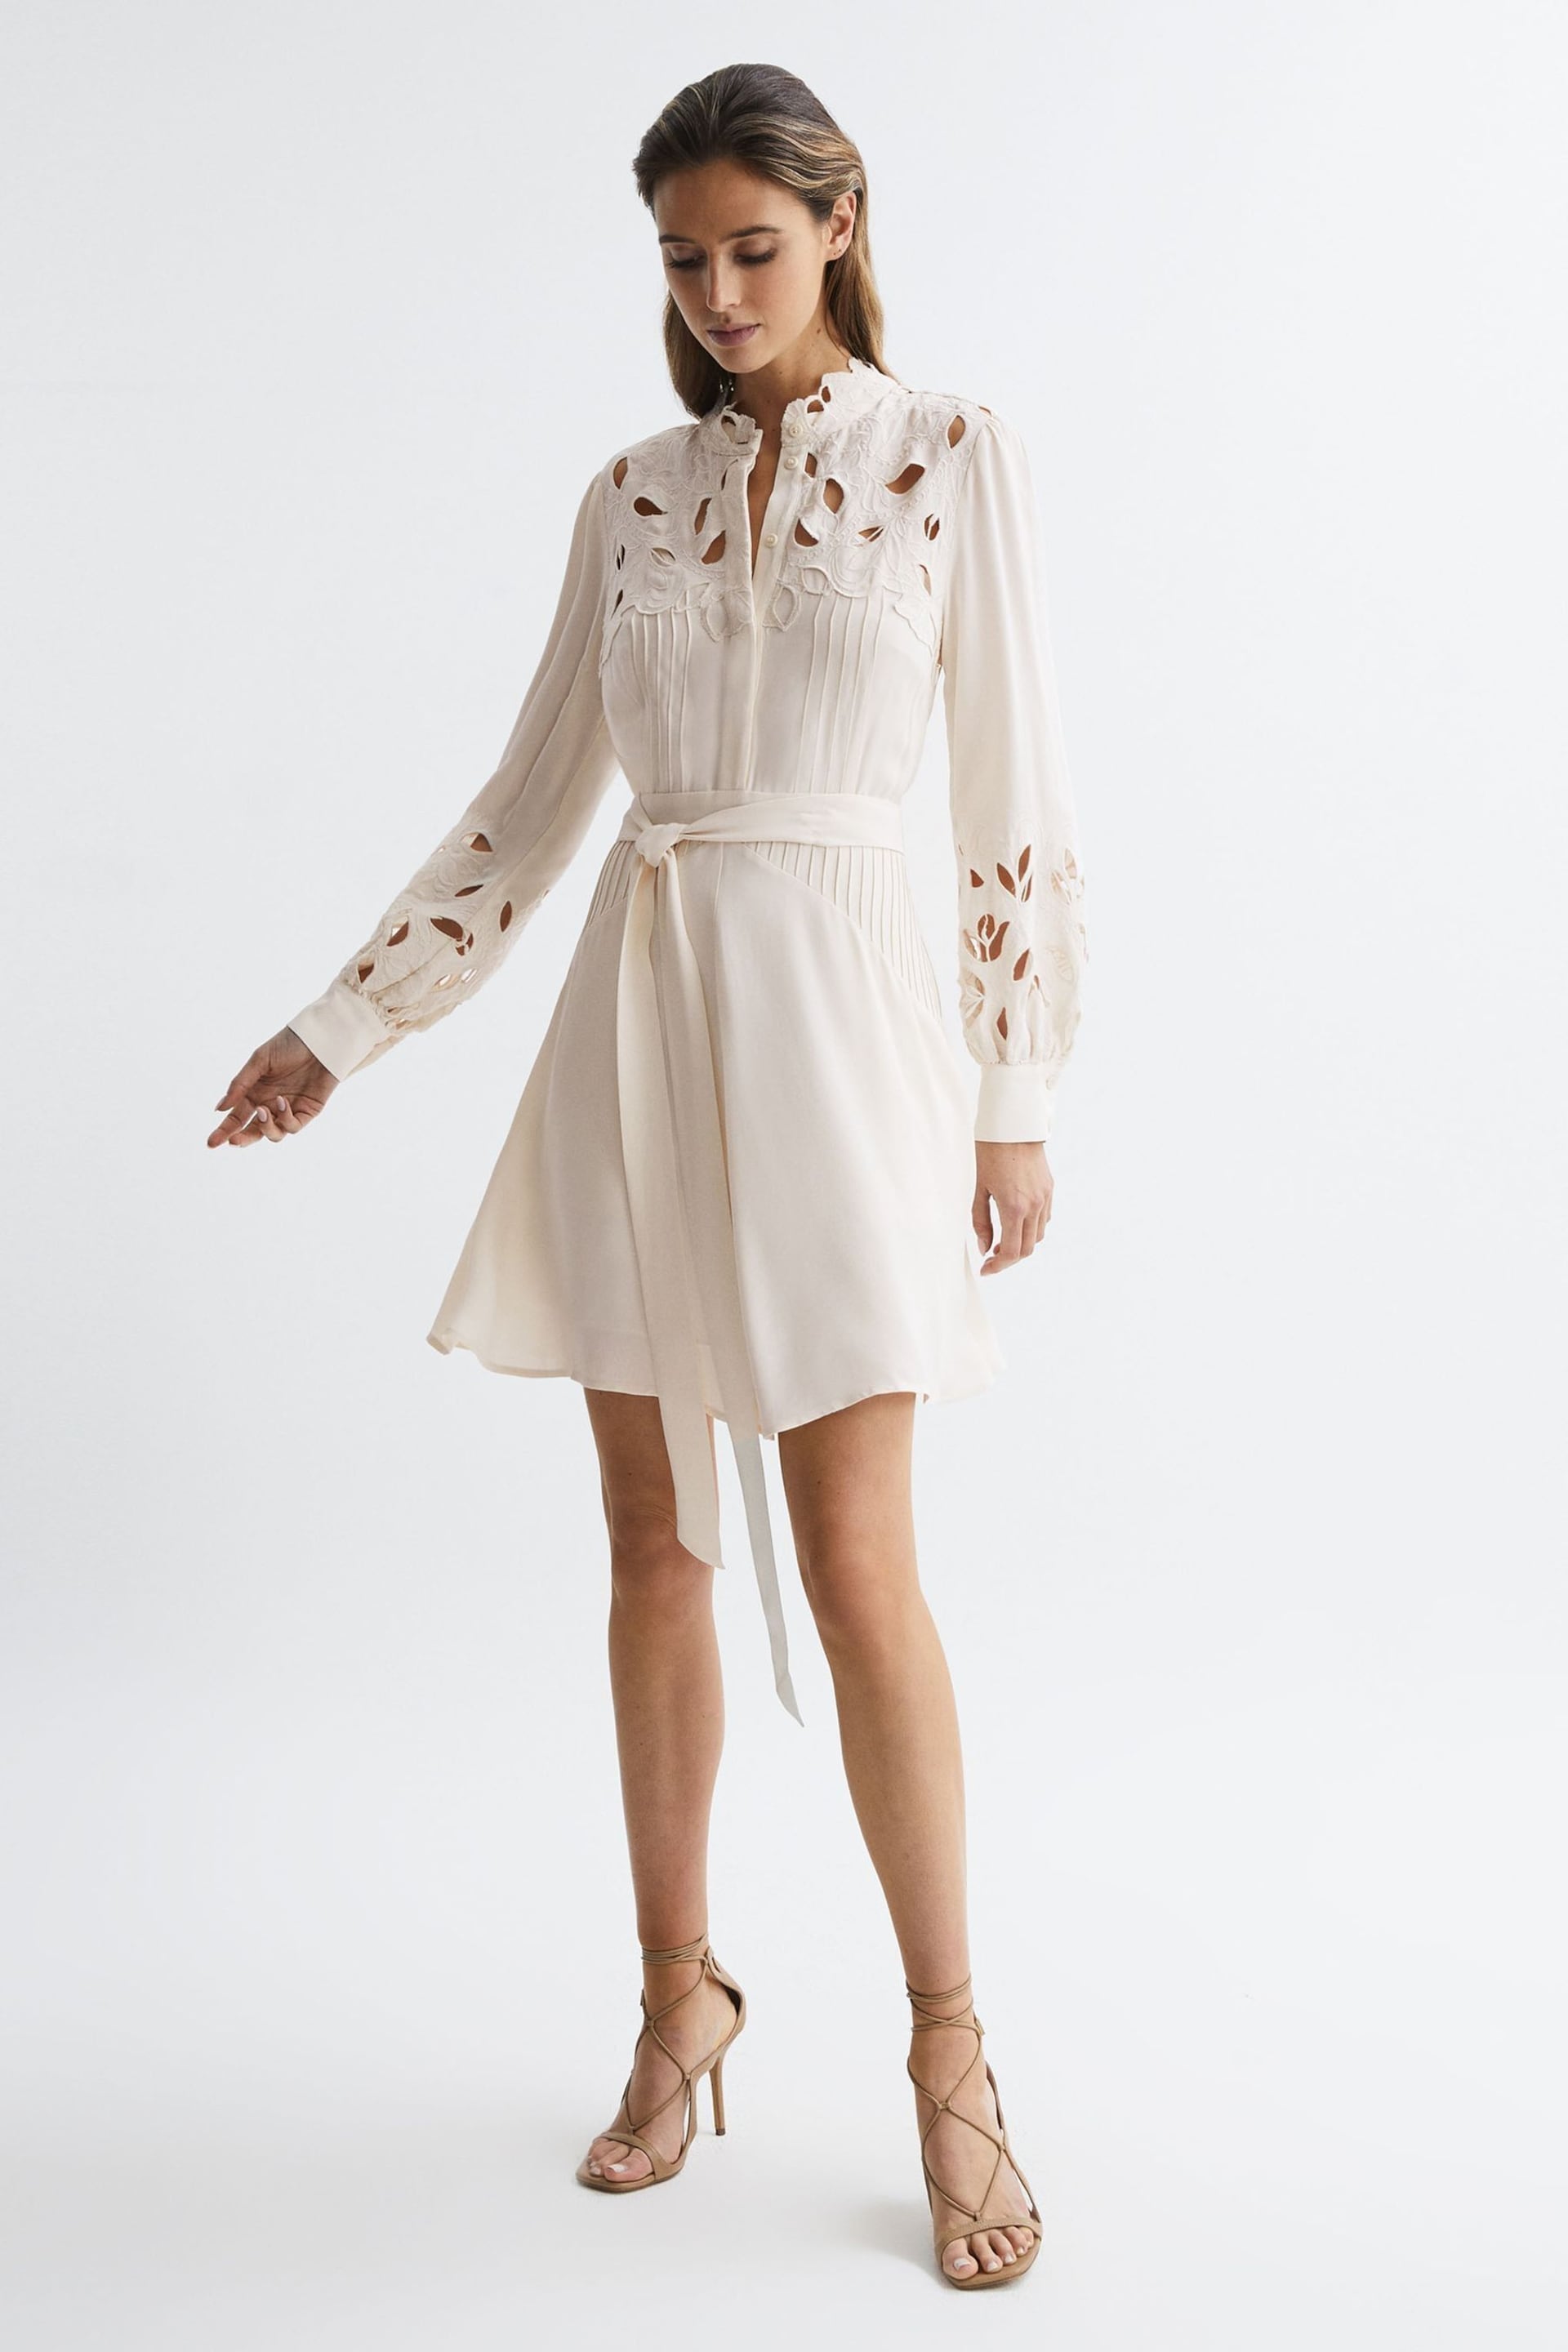 Reiss Ivory Clara Fitted Lace Cut-Out Mini Dress - Image 1 of 5